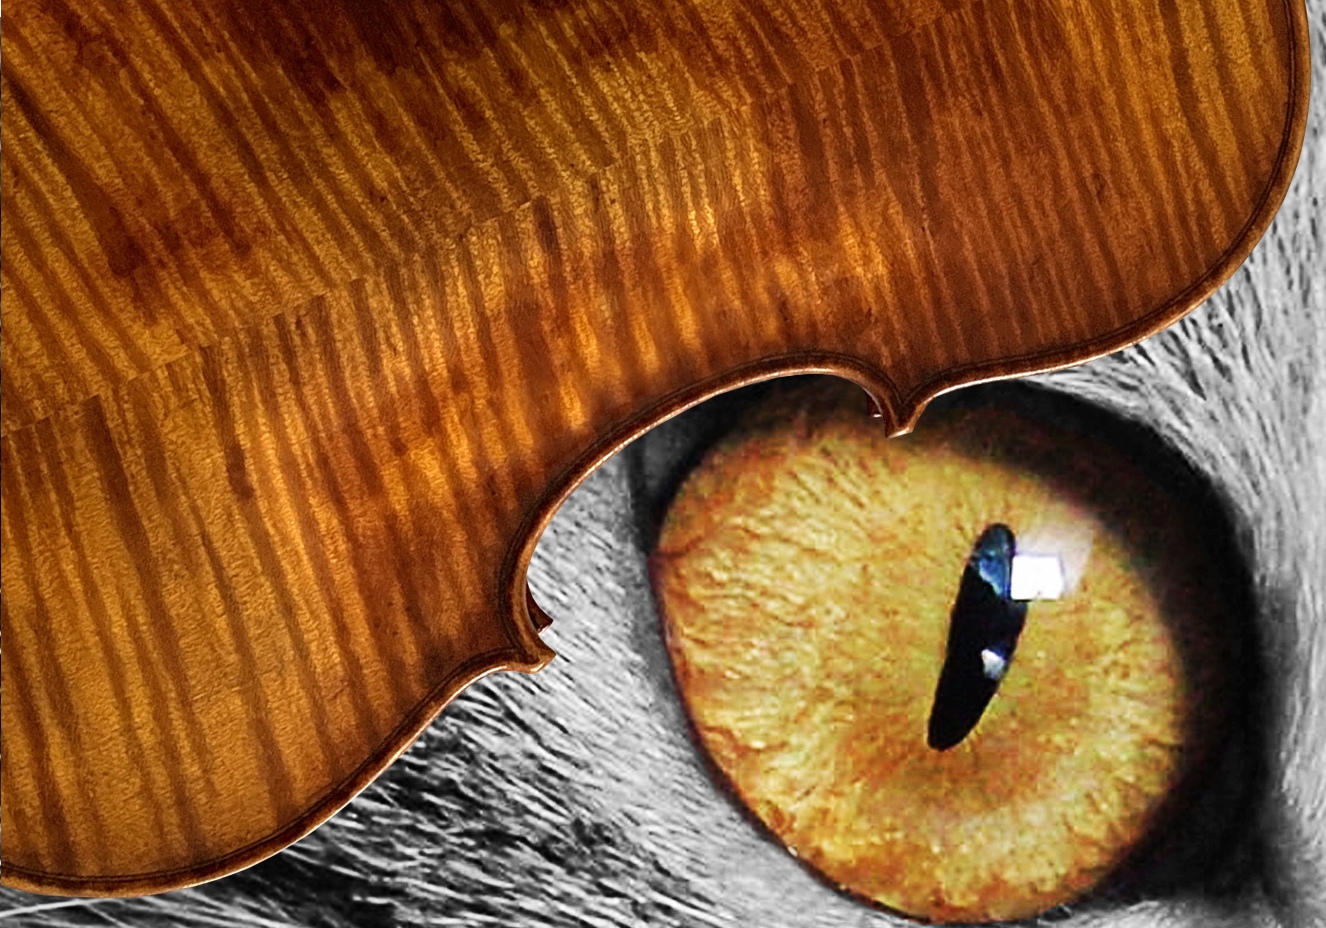 Violin with chatoyant flame over a similar looking cat's eye